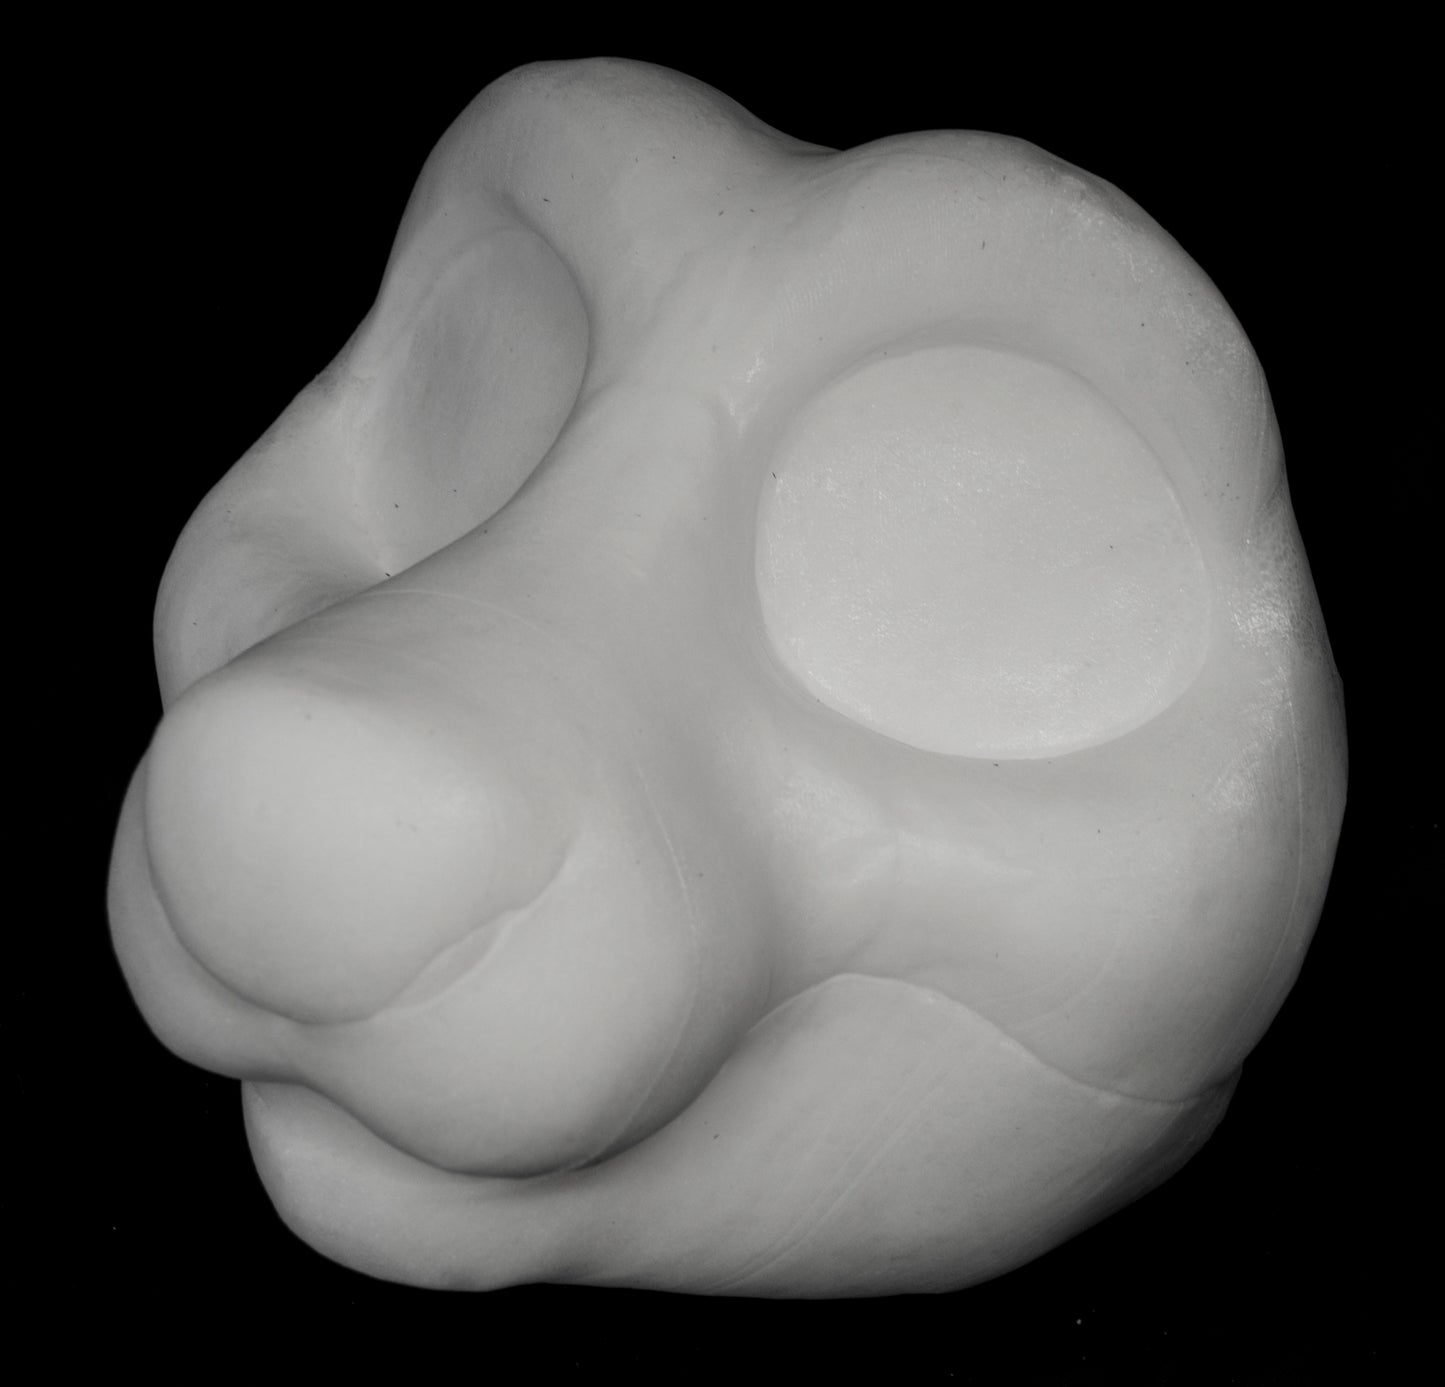 Kemono Critter soft foam head base for costumes, mascots and fursuits.